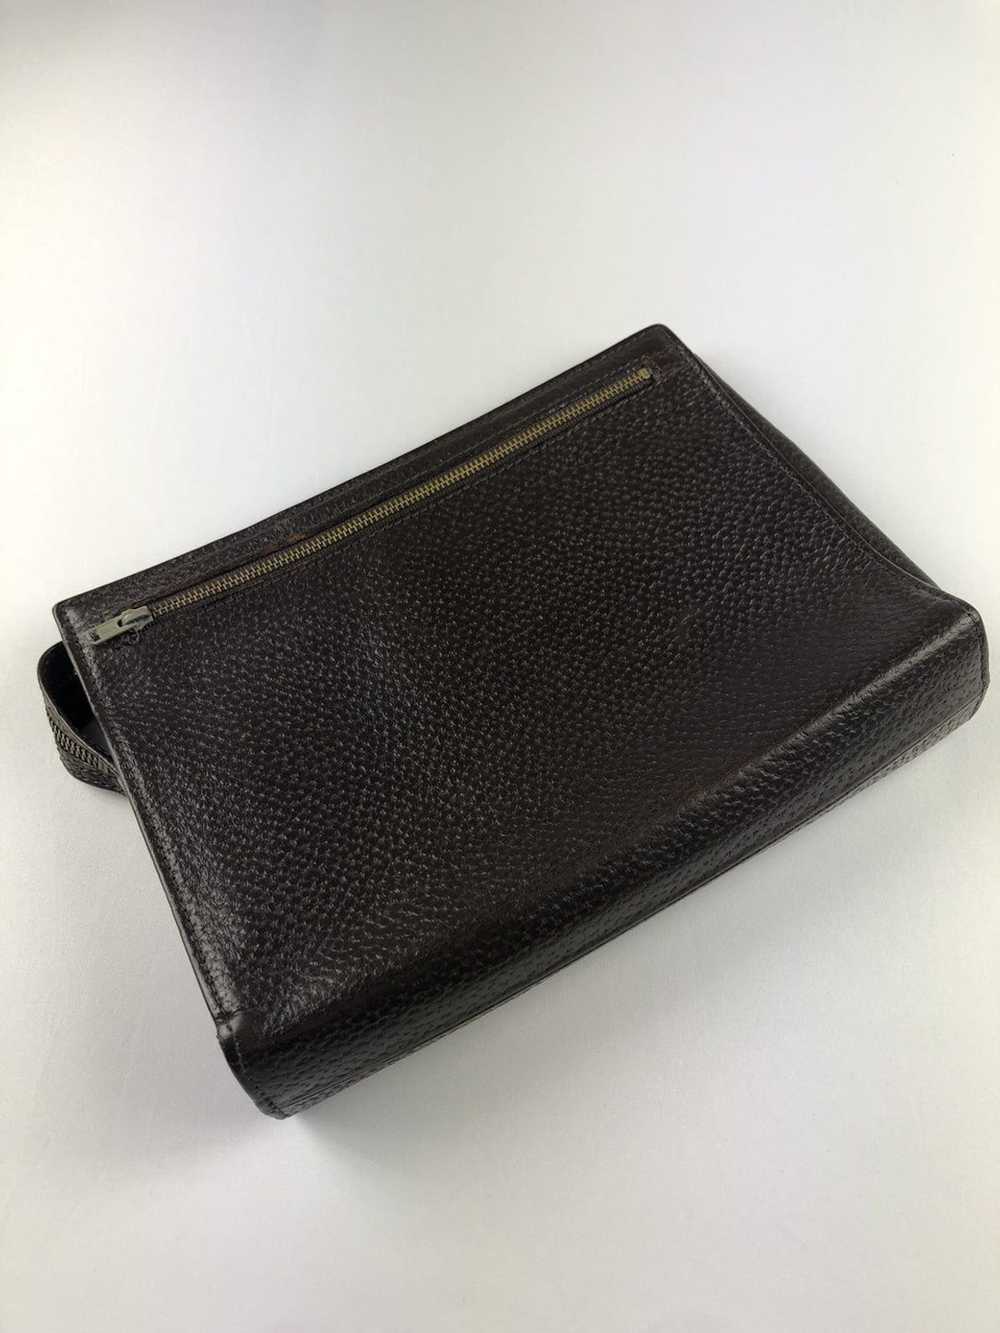 Valentino Valentino brown leather clutch bag - image 7